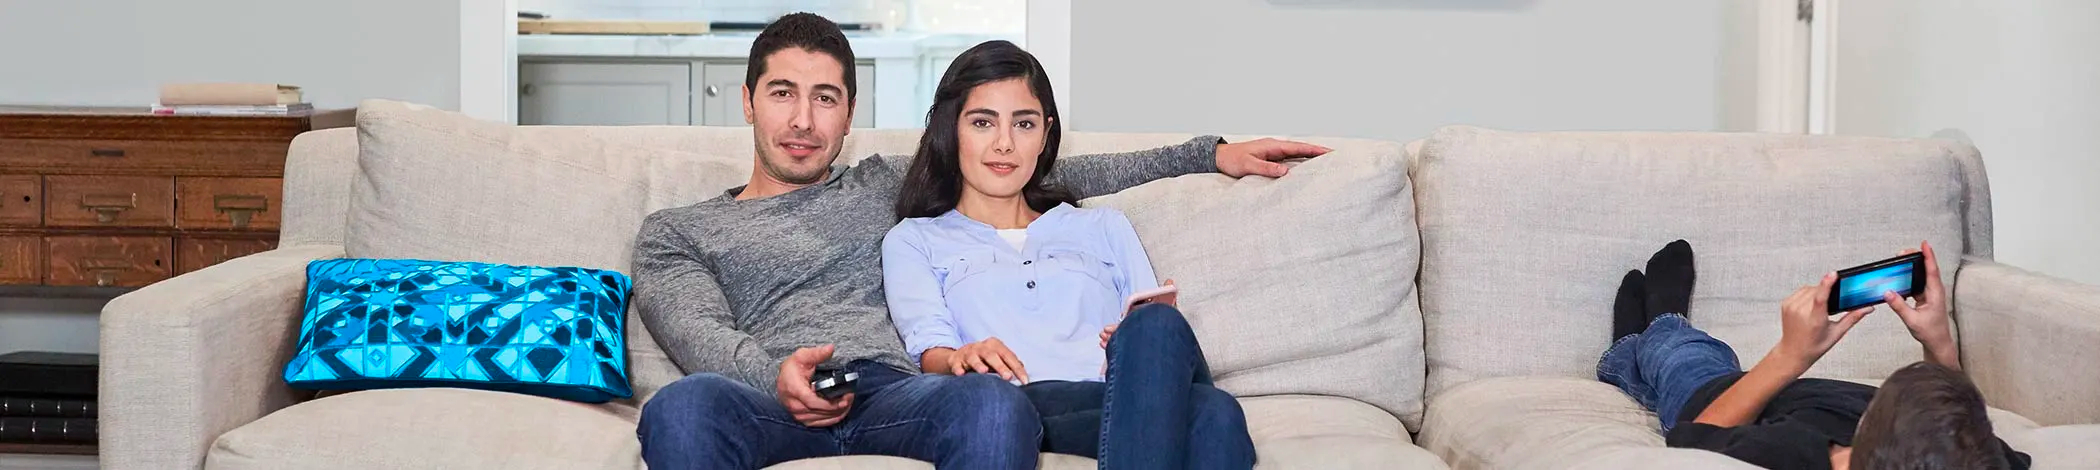 Couple using TV remote on couch while child uses smart phone